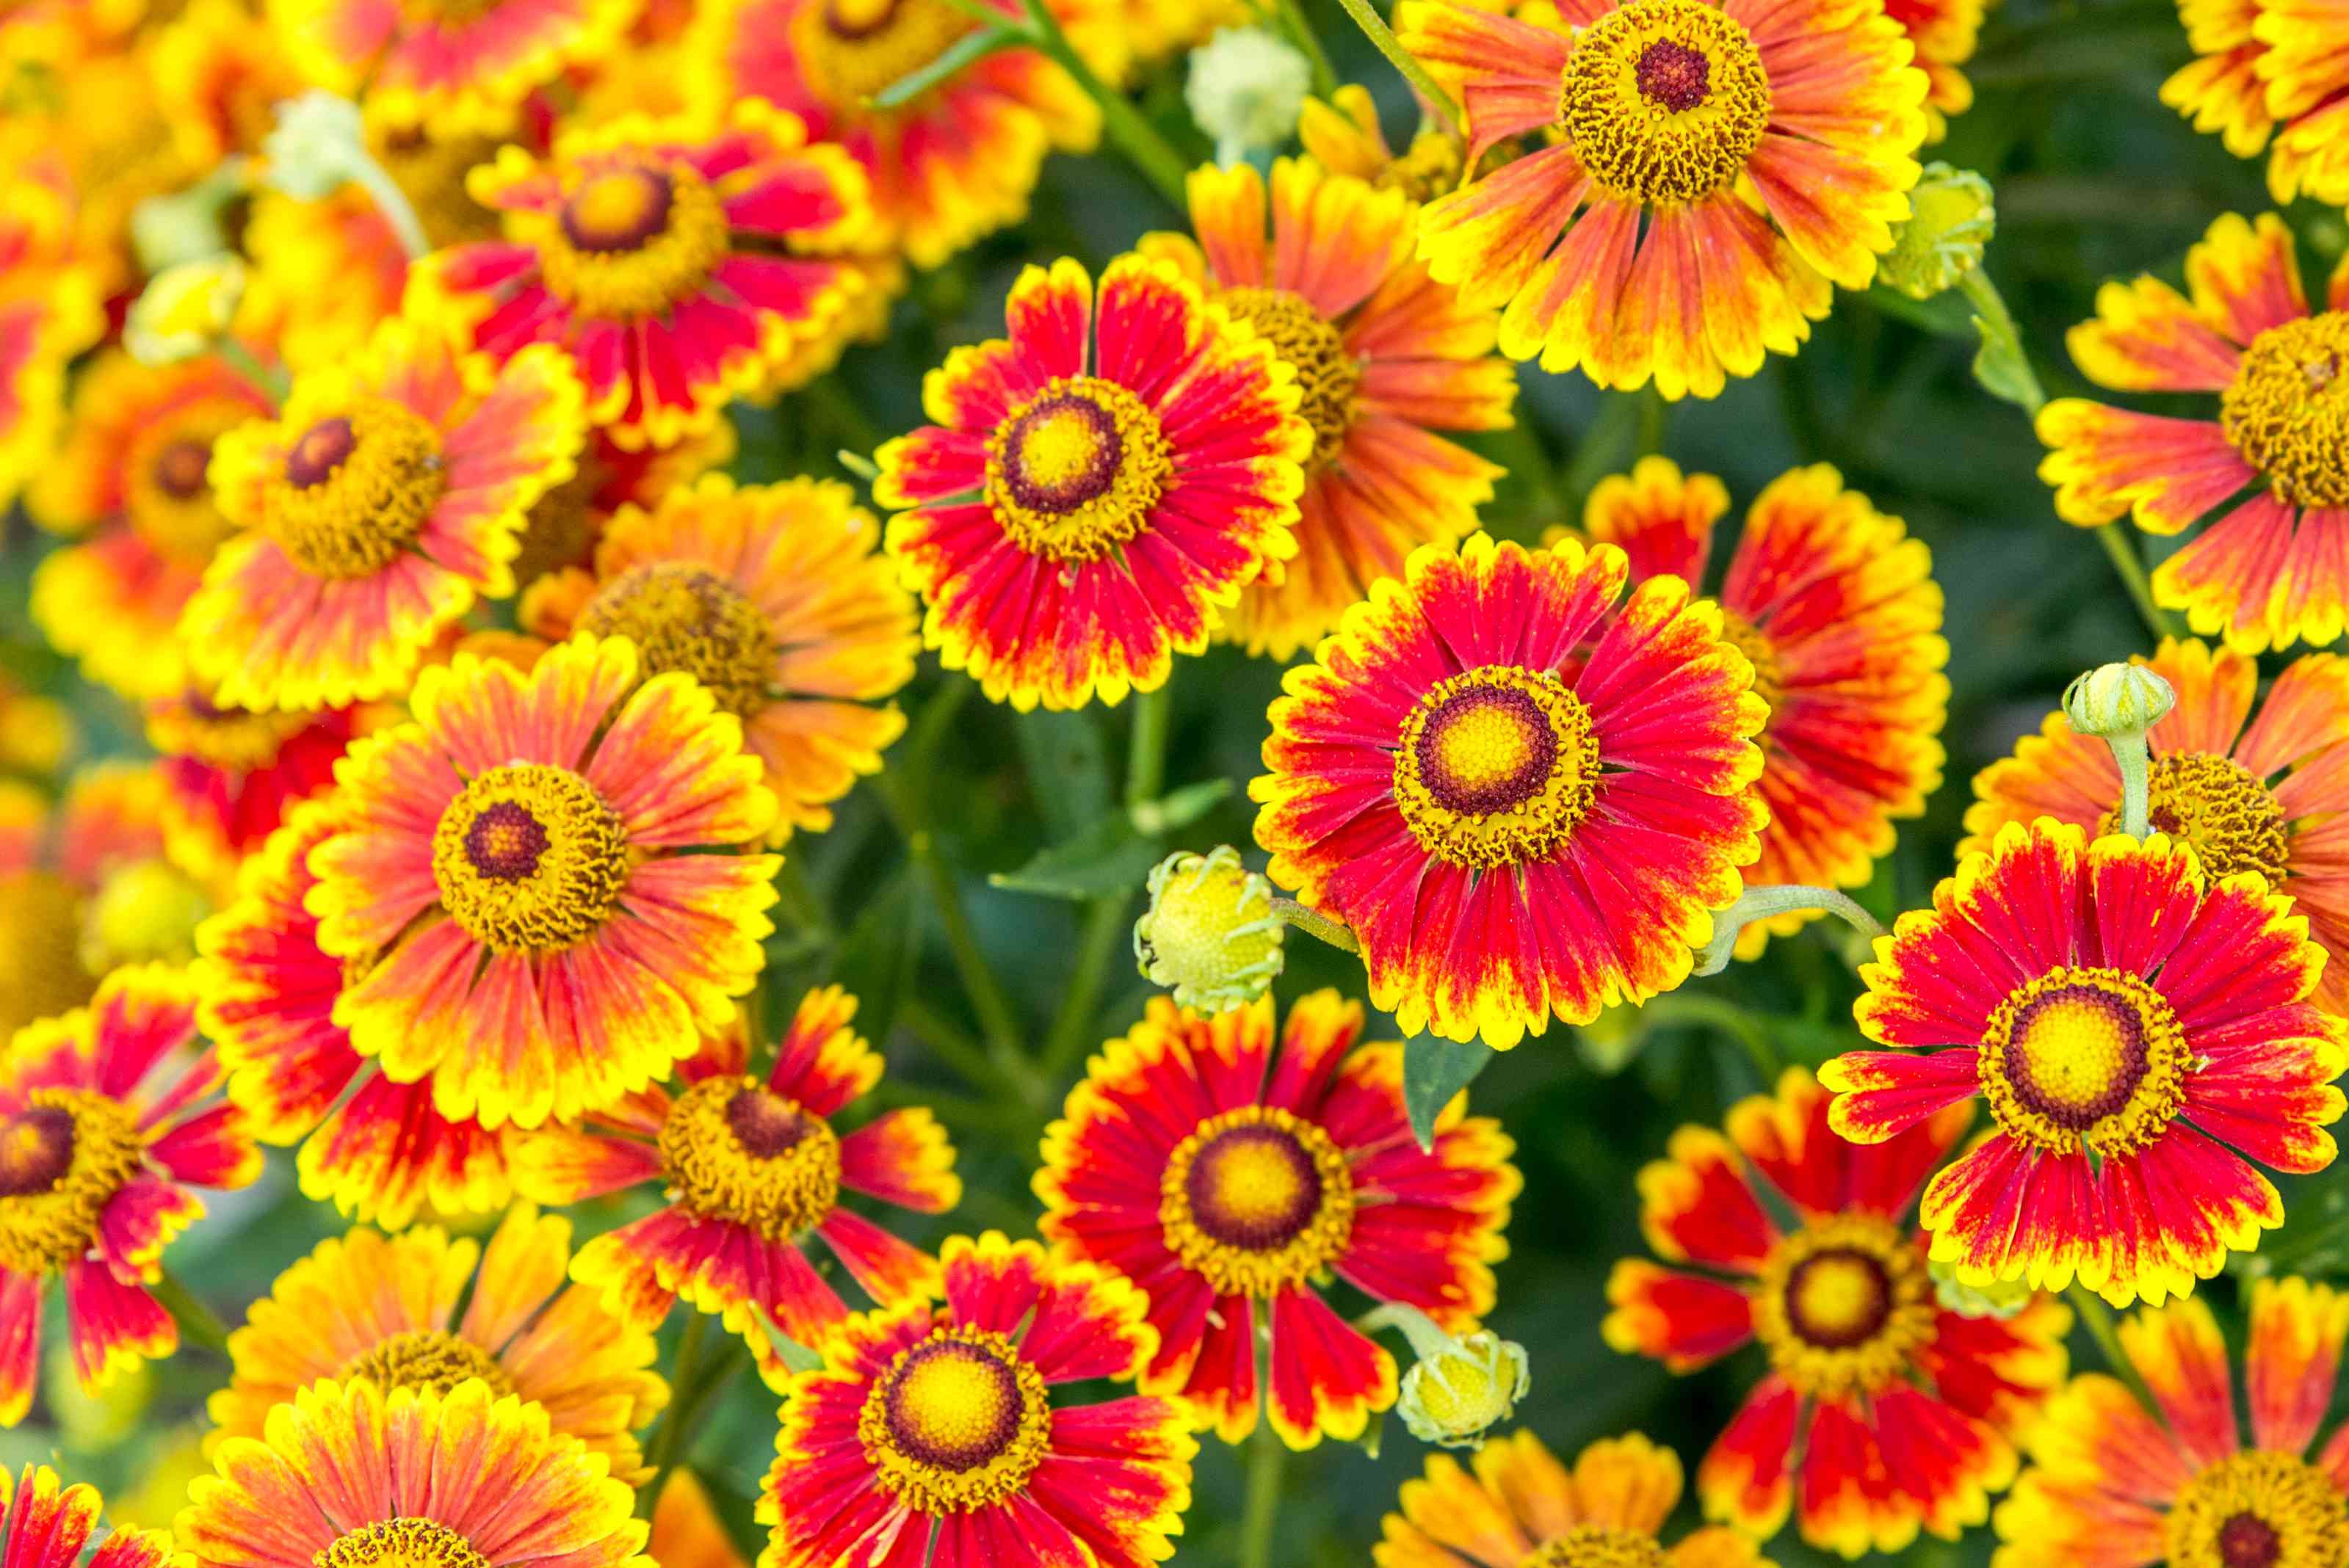 Autumn Greenfingers: What to Plant in Your Garden Now for a Vibrant Seasonal Display